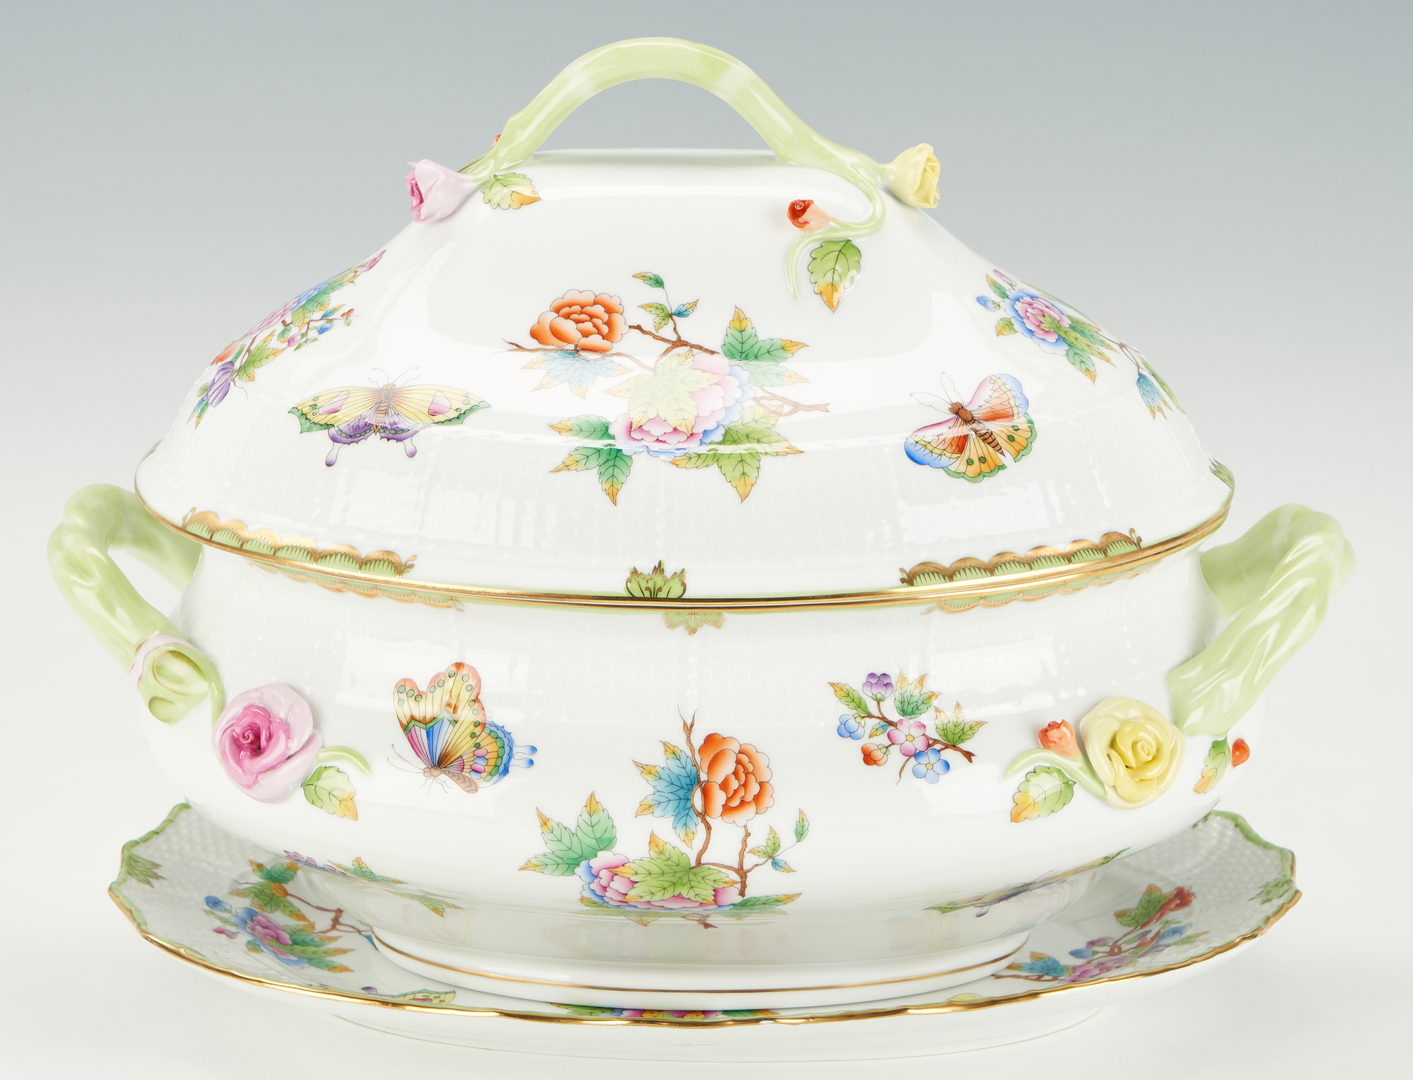 Lot 943: Herend Queen Victoria Tureen and Underplate